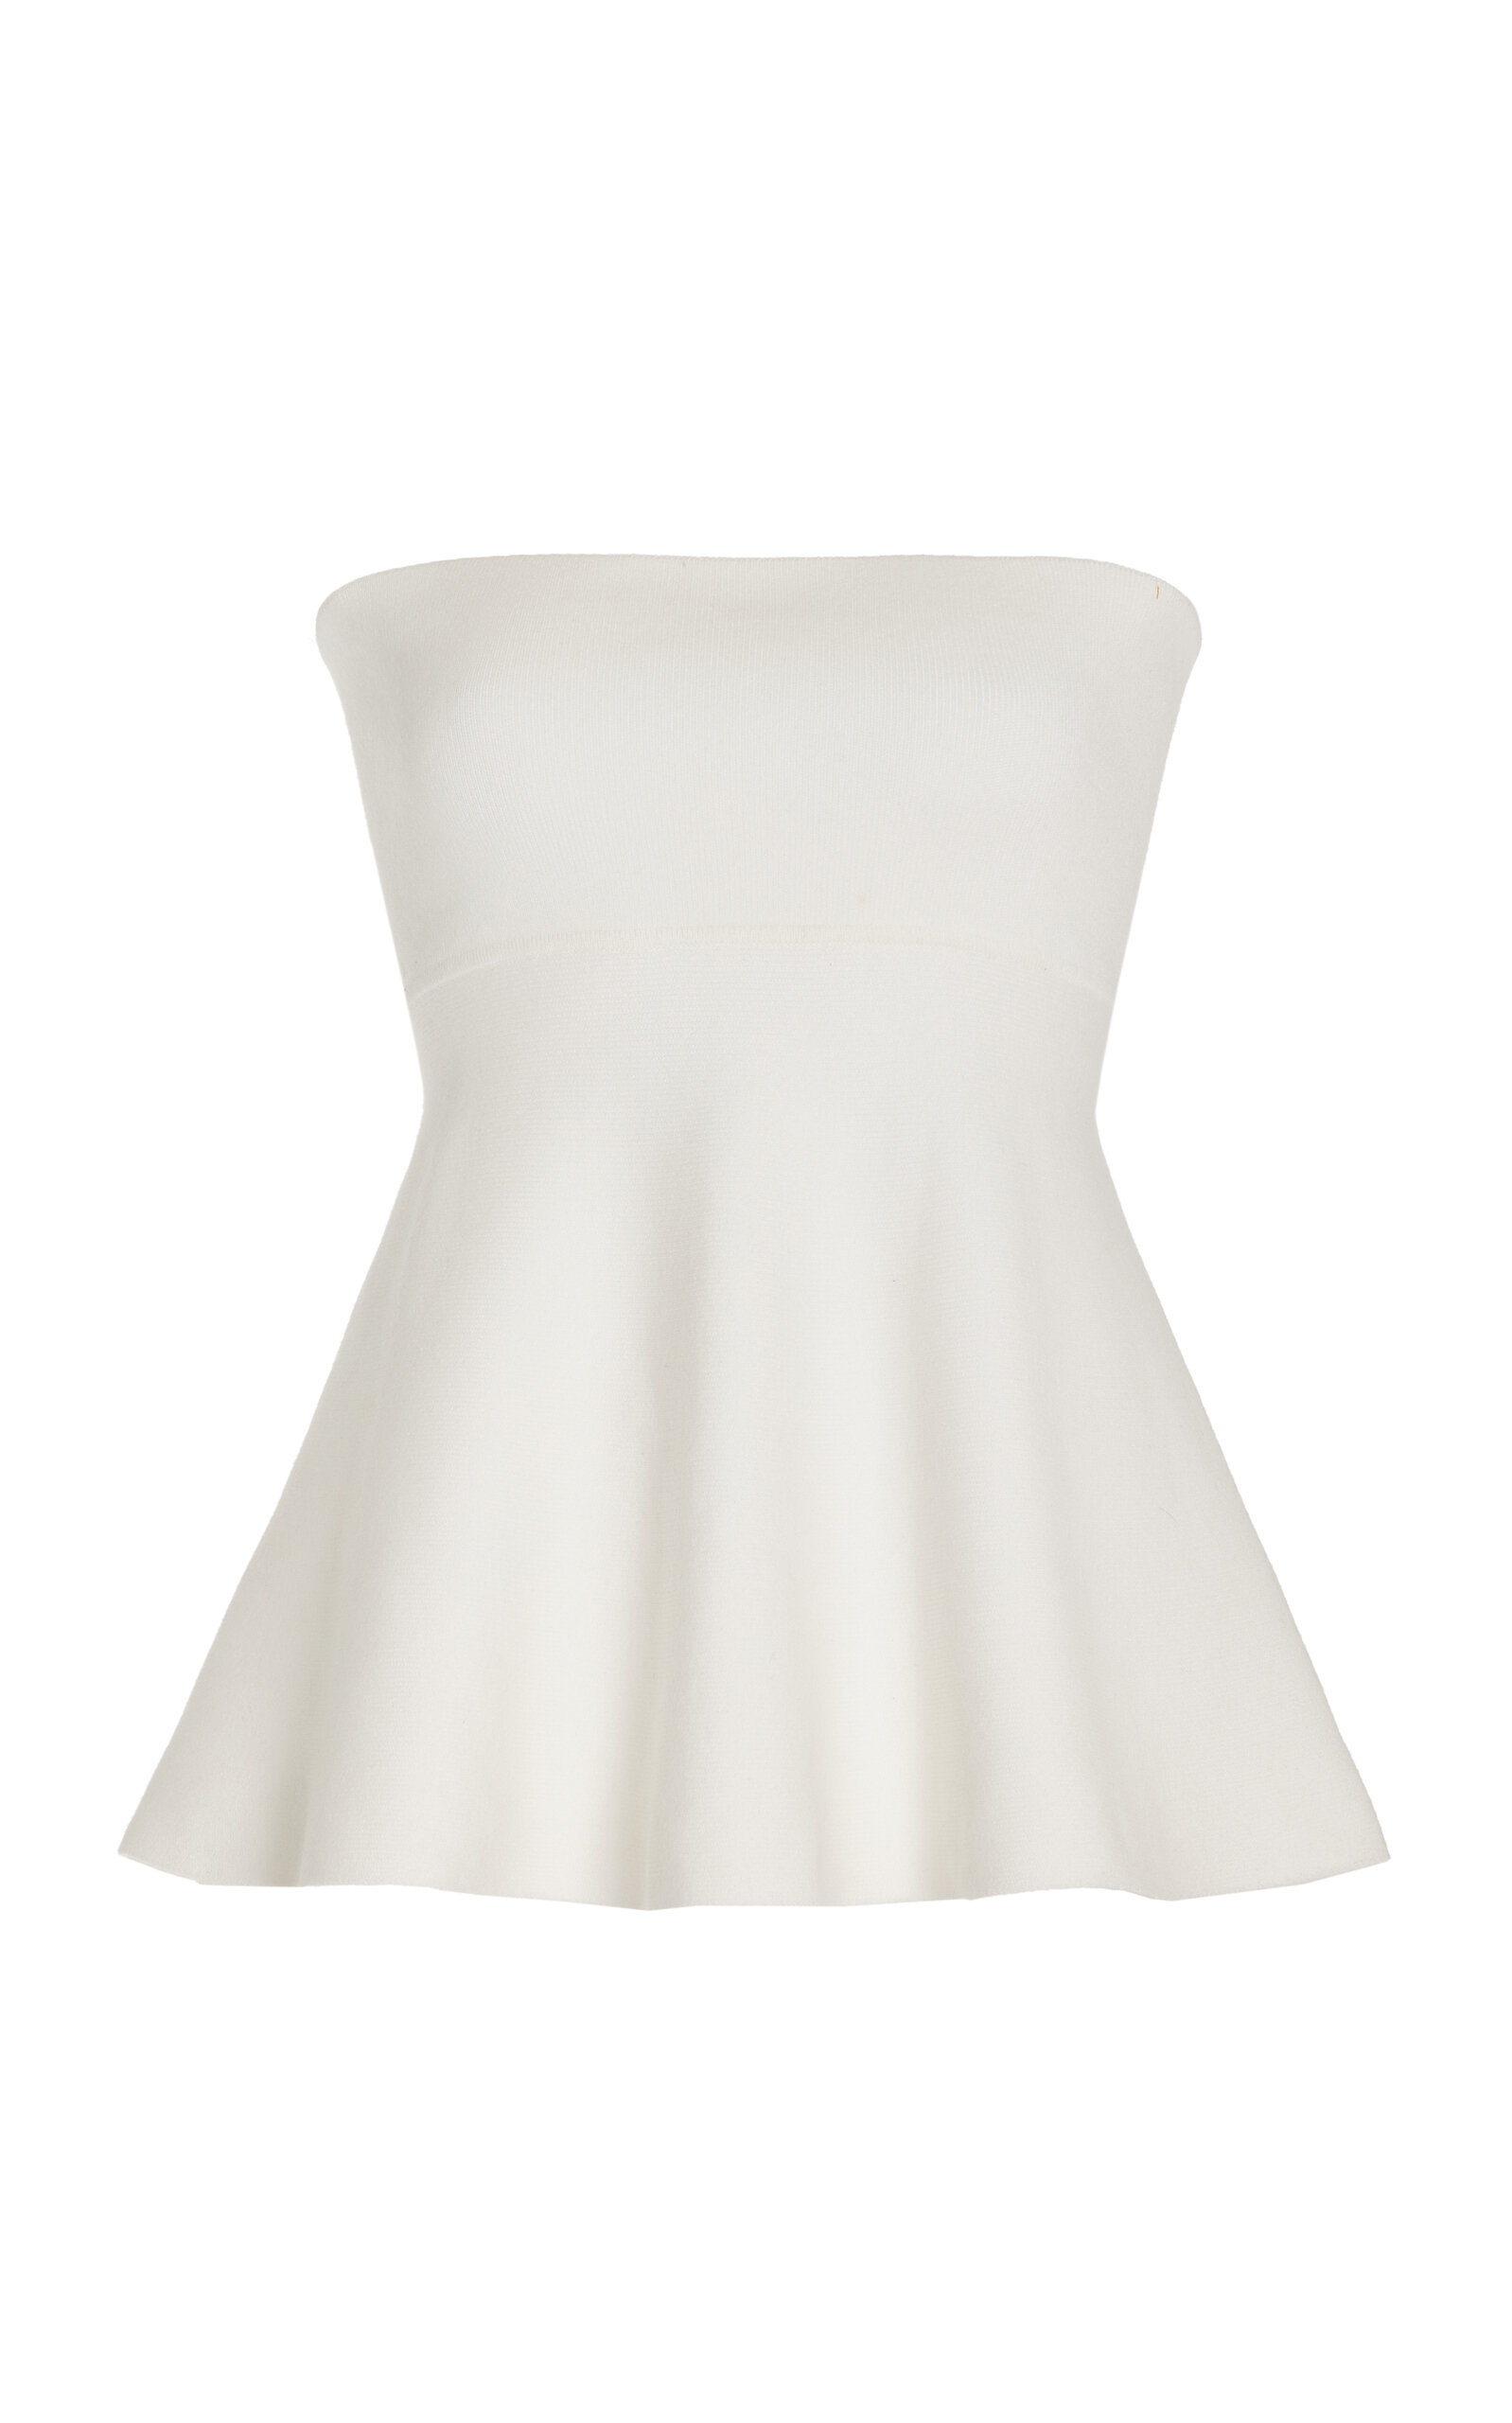 Shop The Frankie Shop Exclusive Agathe Knit Peplum Top In White